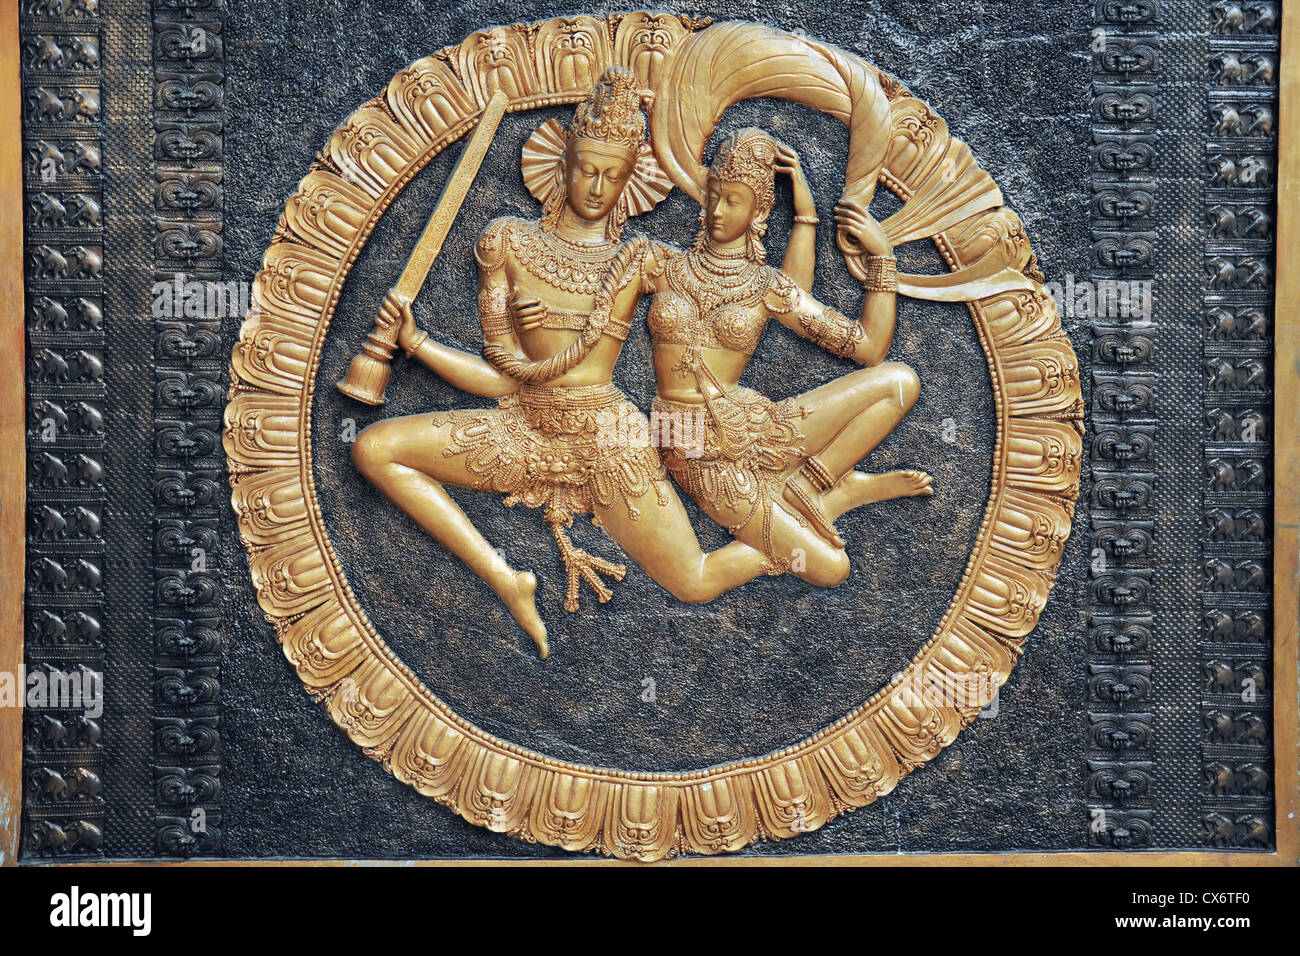 dancing deity artworks on the wall Stock Photo